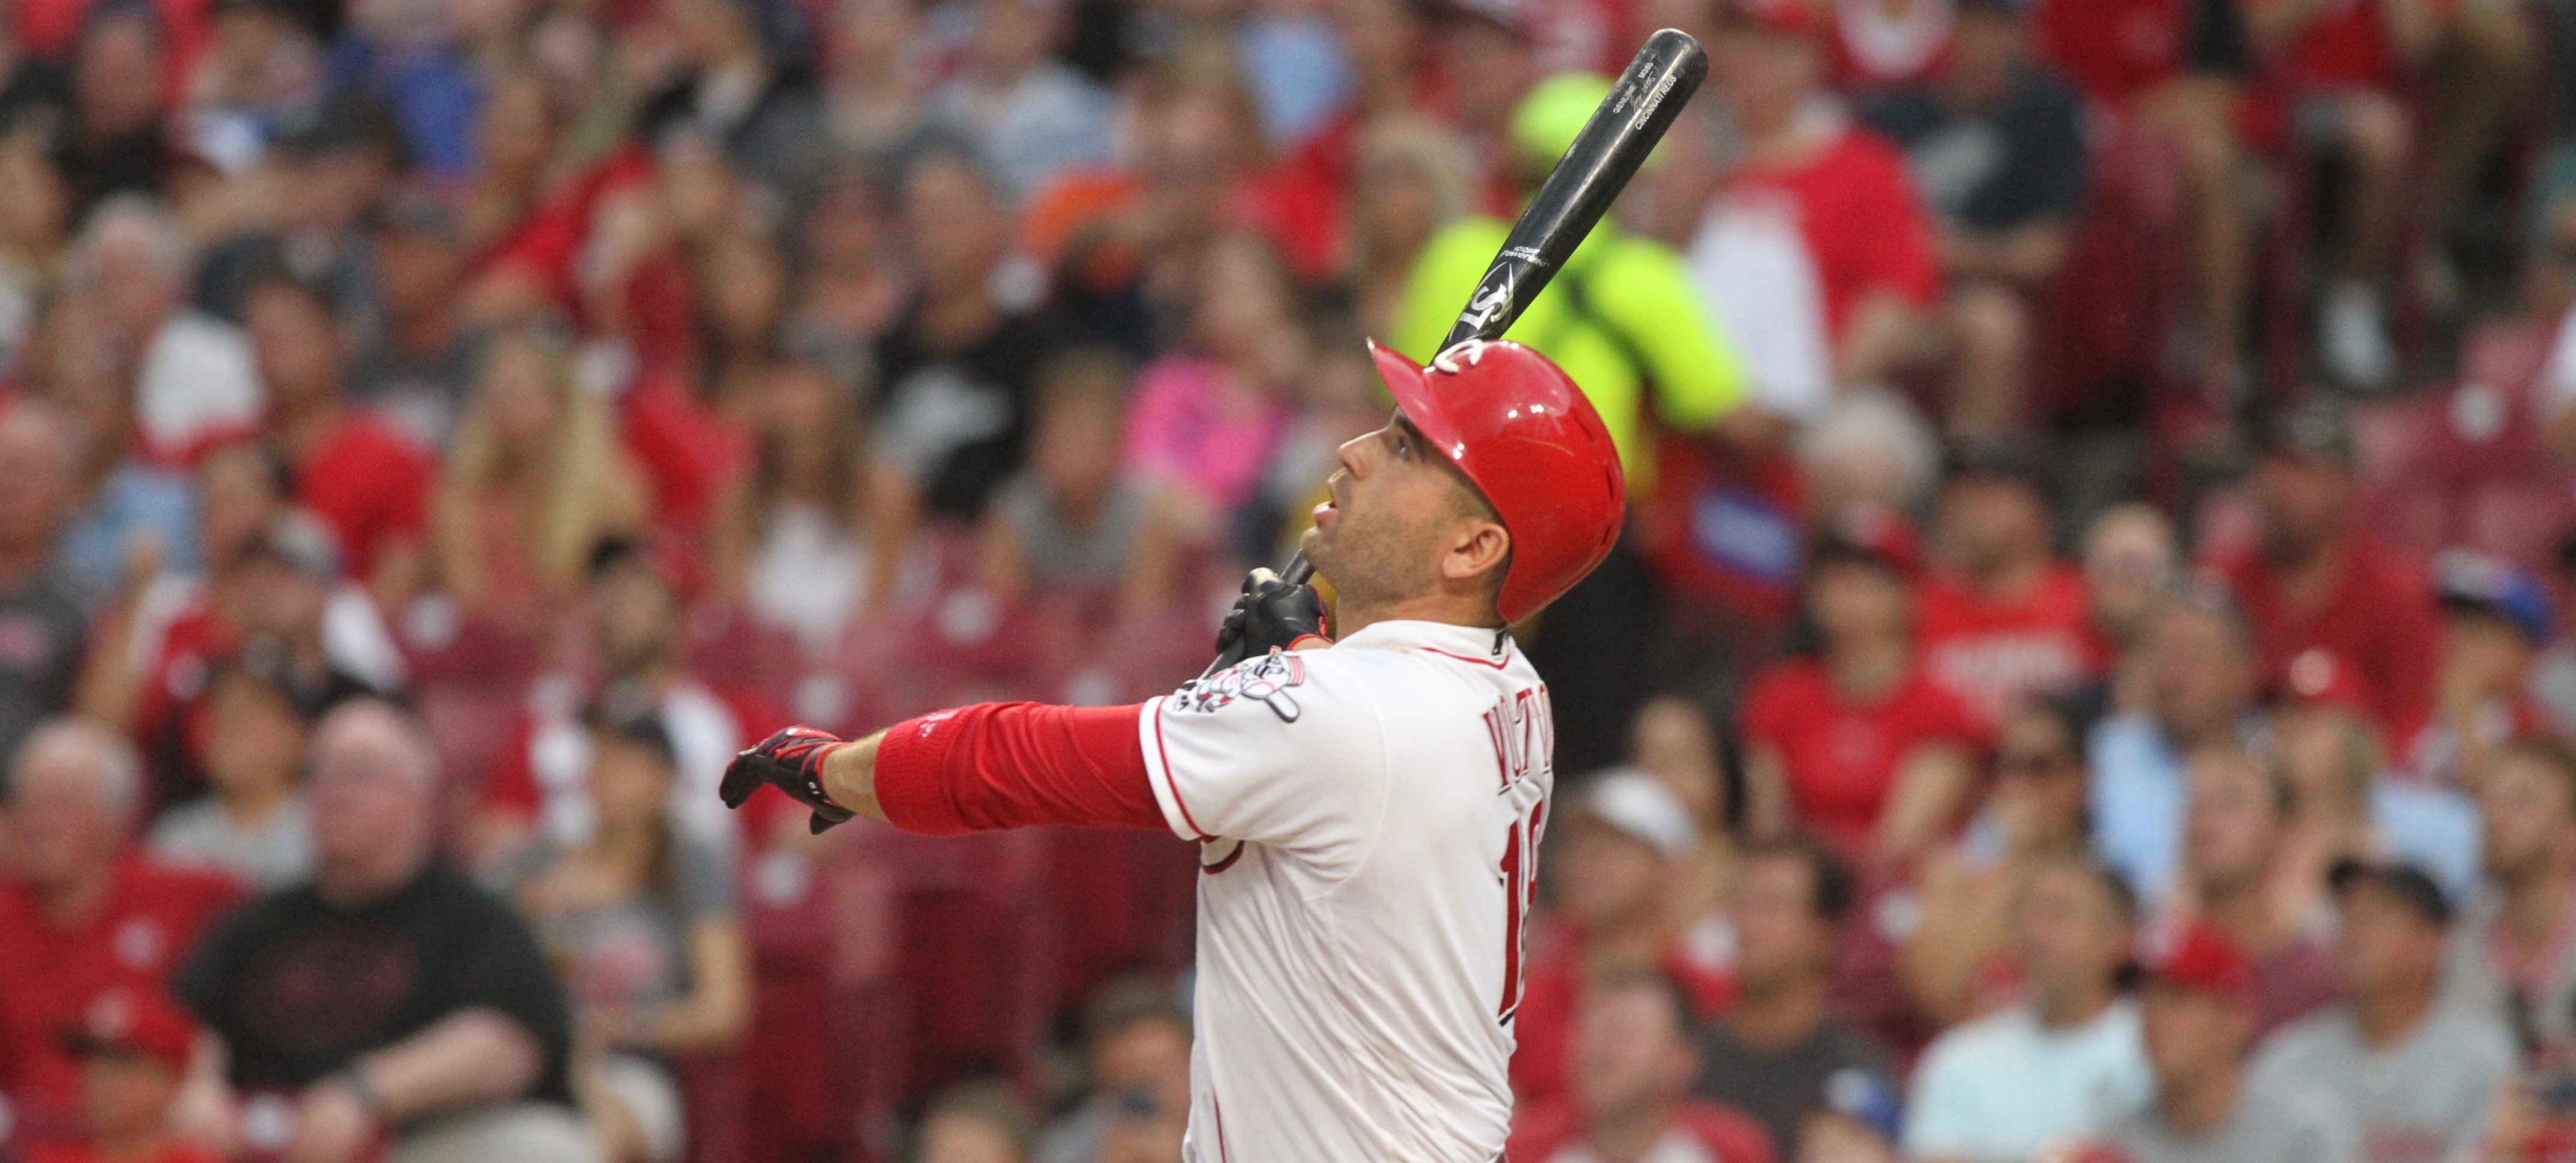 Cincinnati Reds' Joey Votto gets ejected during fan's first game